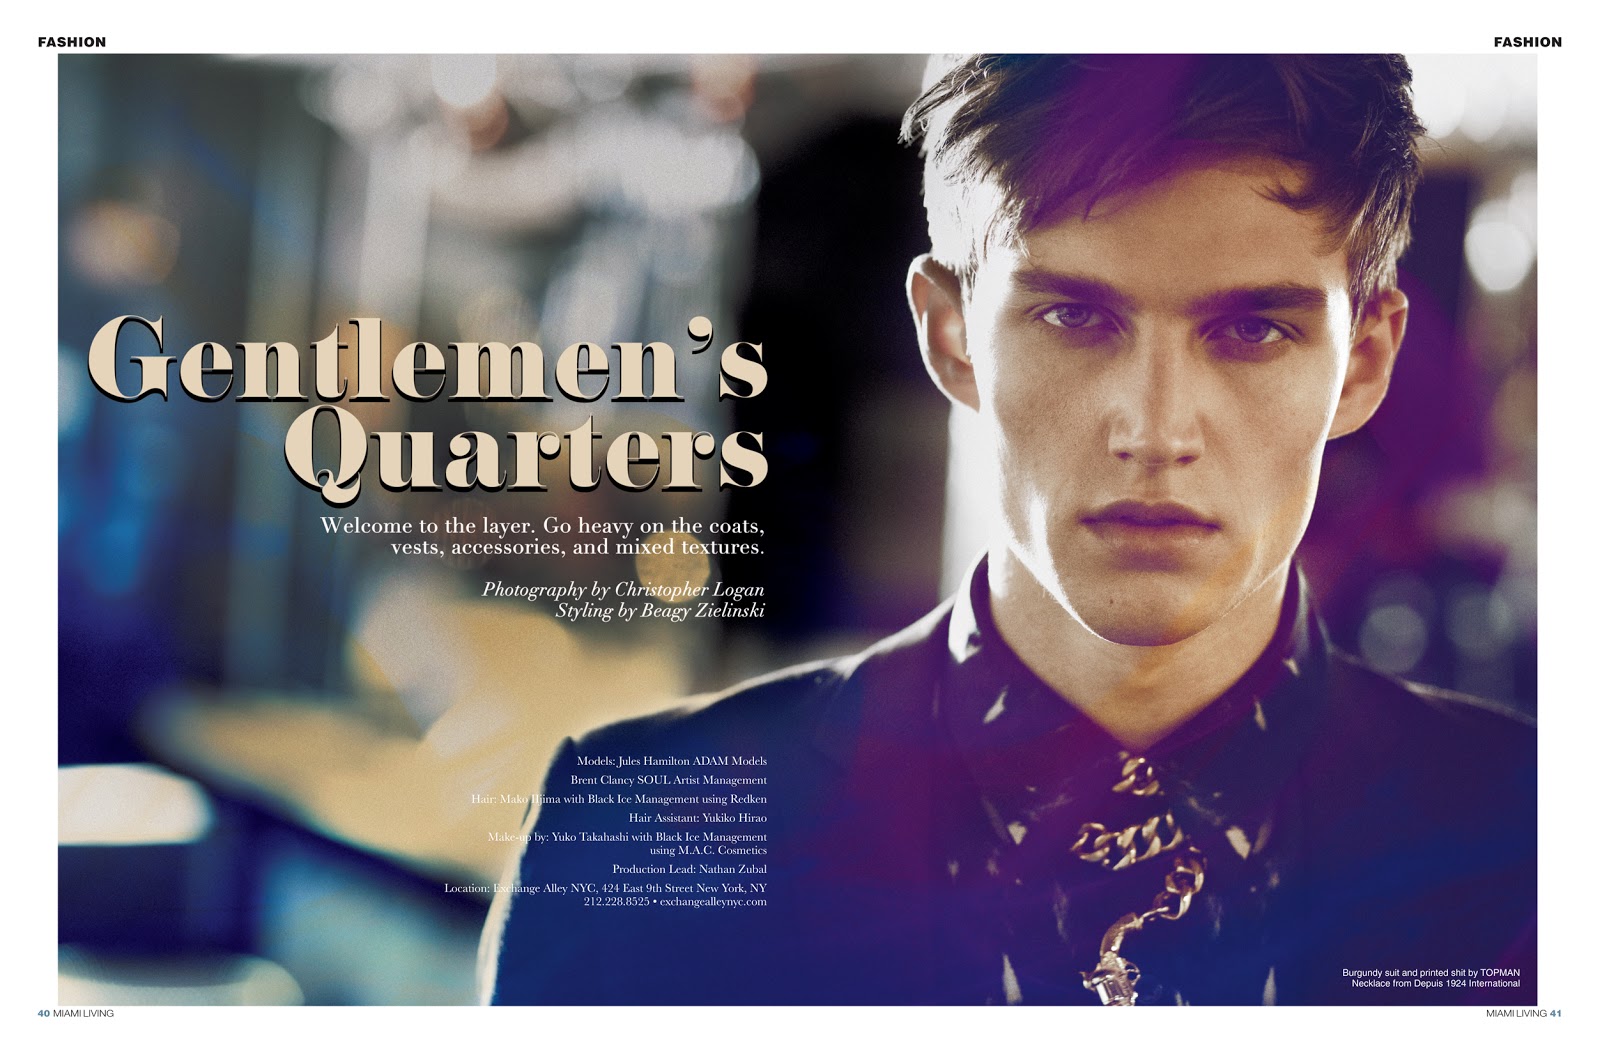 OWAIN 'MOSS' PROCTOR - EDITORIAL/LIFESTYLE: October 2012